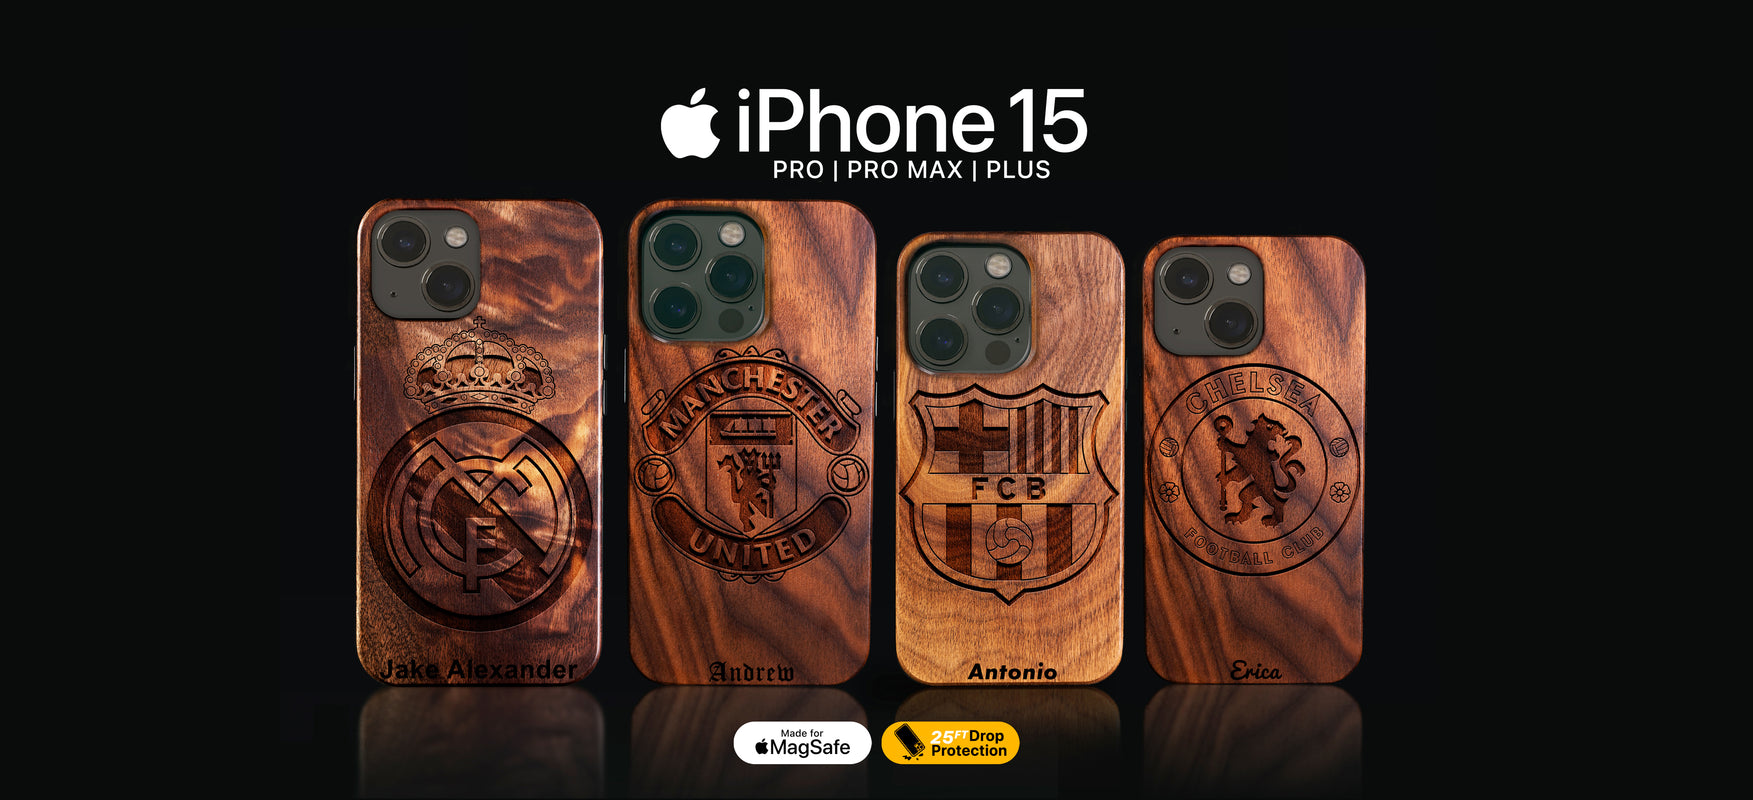 Personalized International Football Club  iPhone 15, iPhone 15 Pro, iPhone 15 Pro Max, iPhone 15 Plus Cases Customized International Football Club Gifts For Fan MagSafe Football Club iPhone Covers 2023 Christmas Gifts